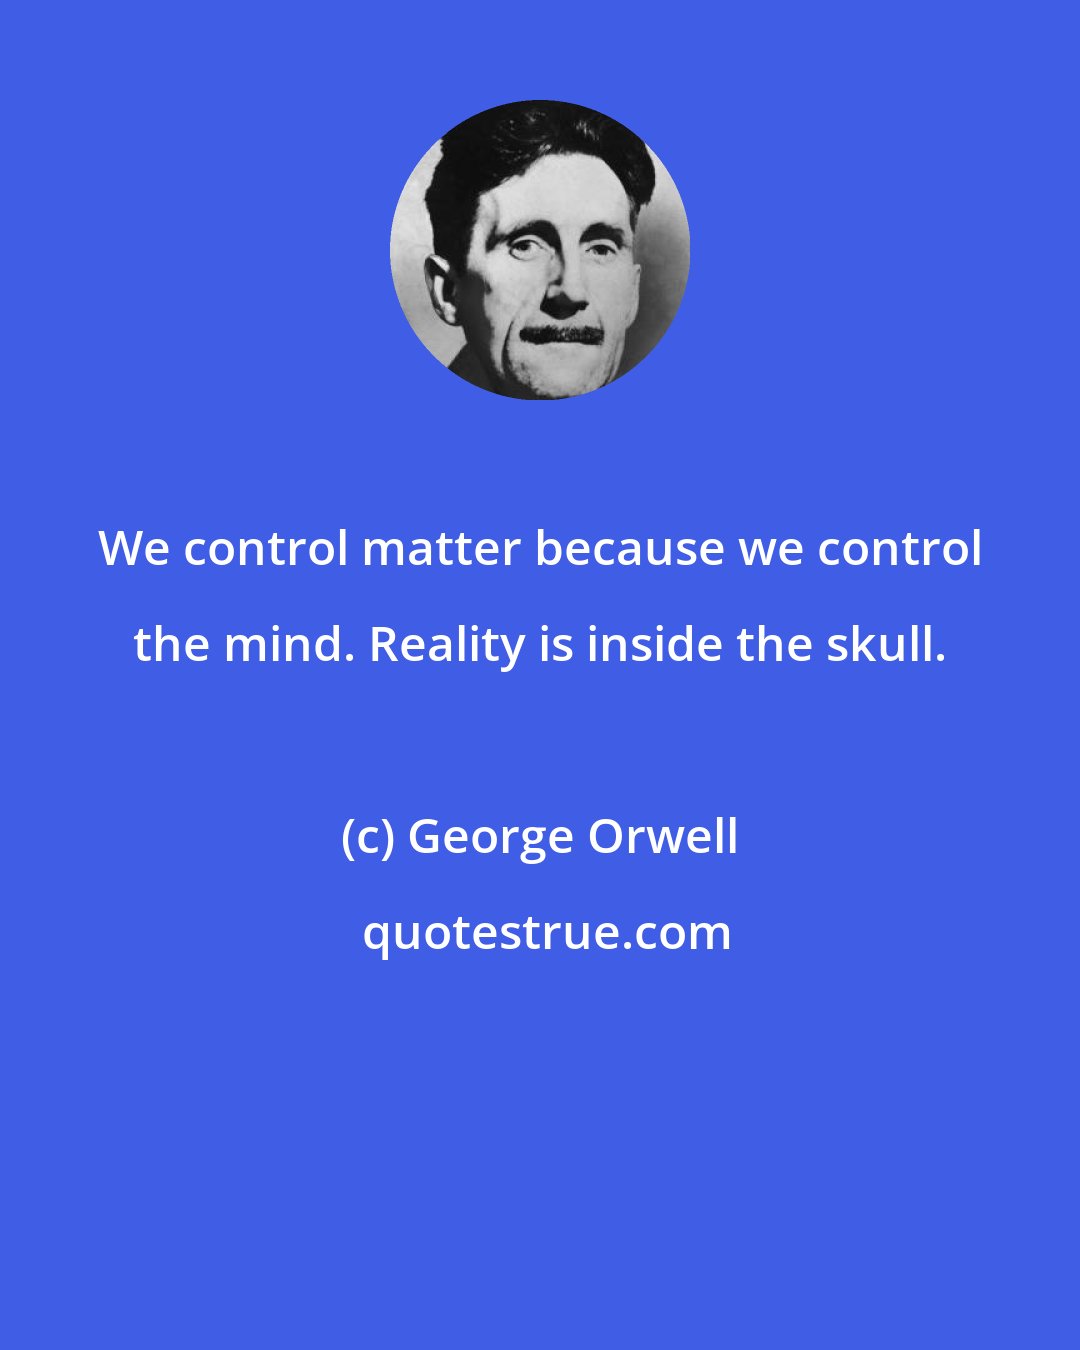 George Orwell: We control matter because we control the mind. Reality is inside the skull.